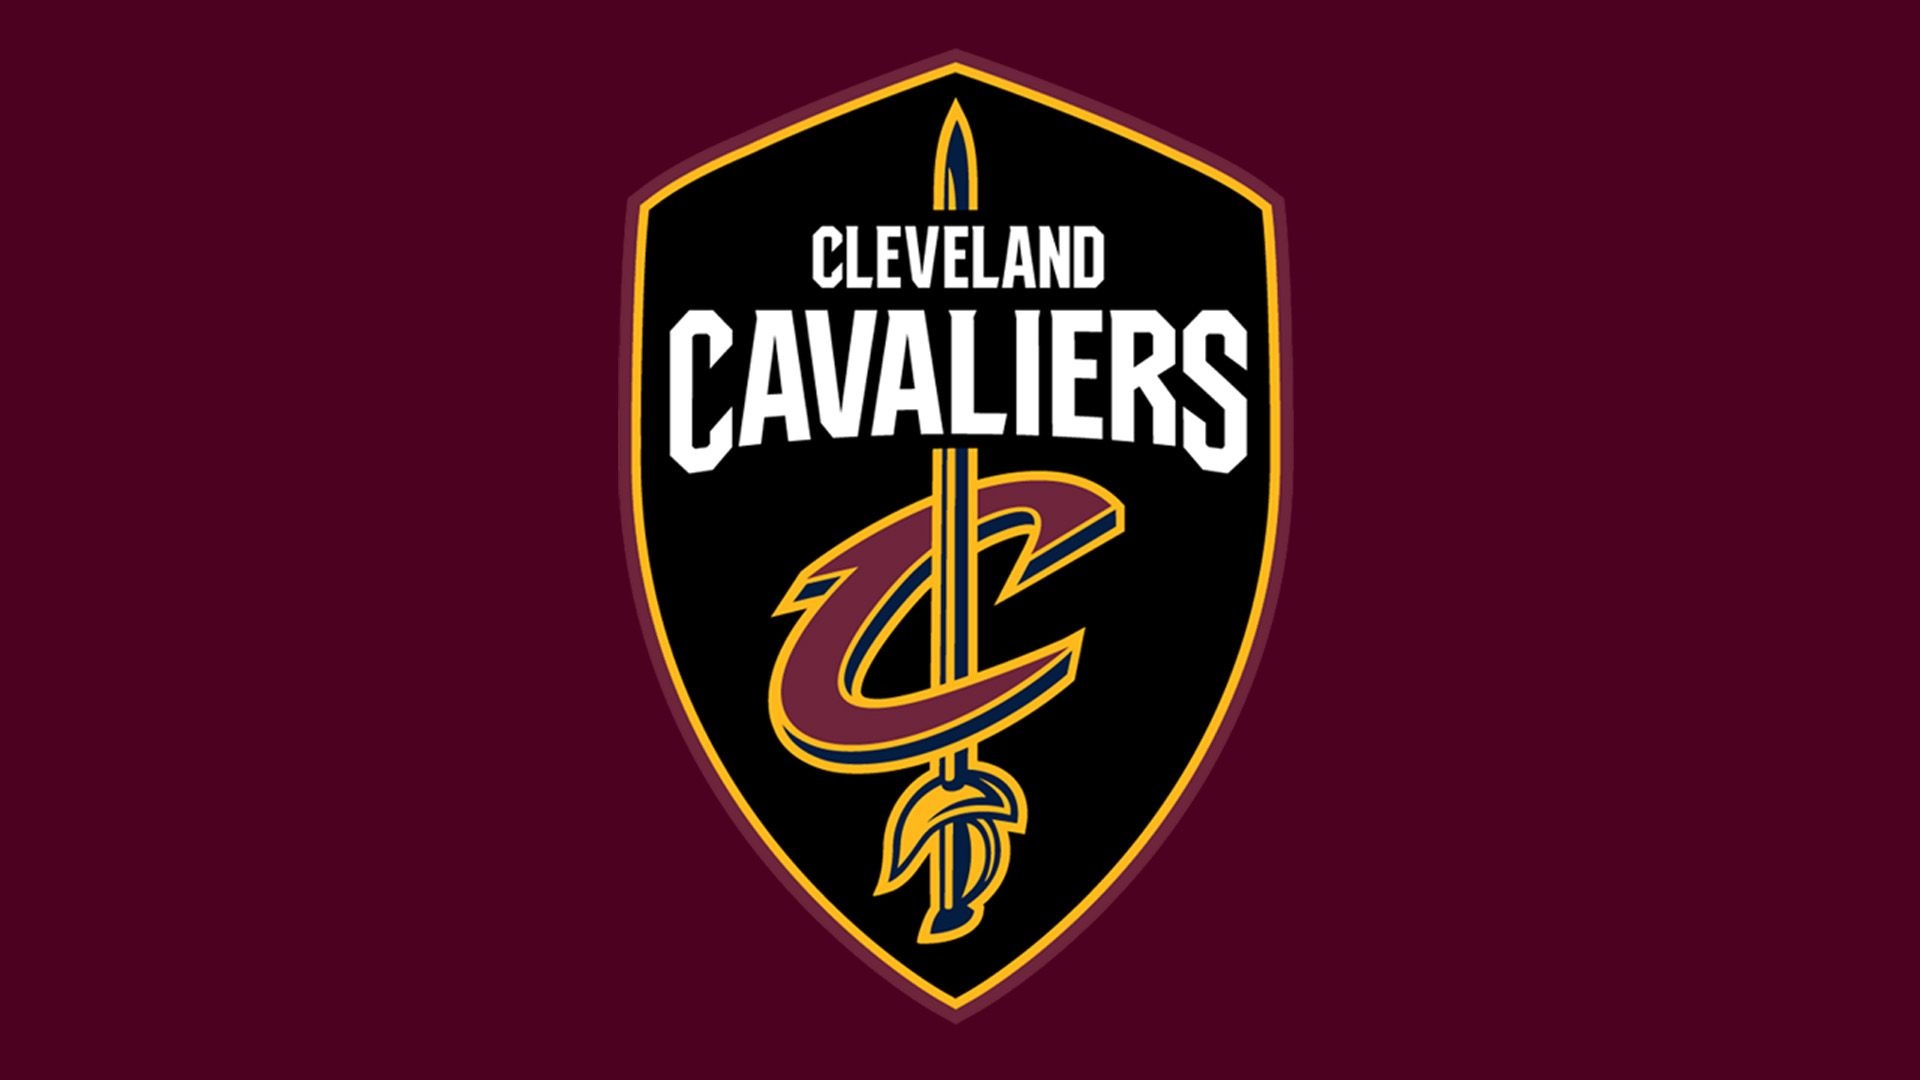 Cleveland Cavaliers: Lost the 2007 NBA Finals to the San Antonio Spurs. 1920x1080 Full HD Background.